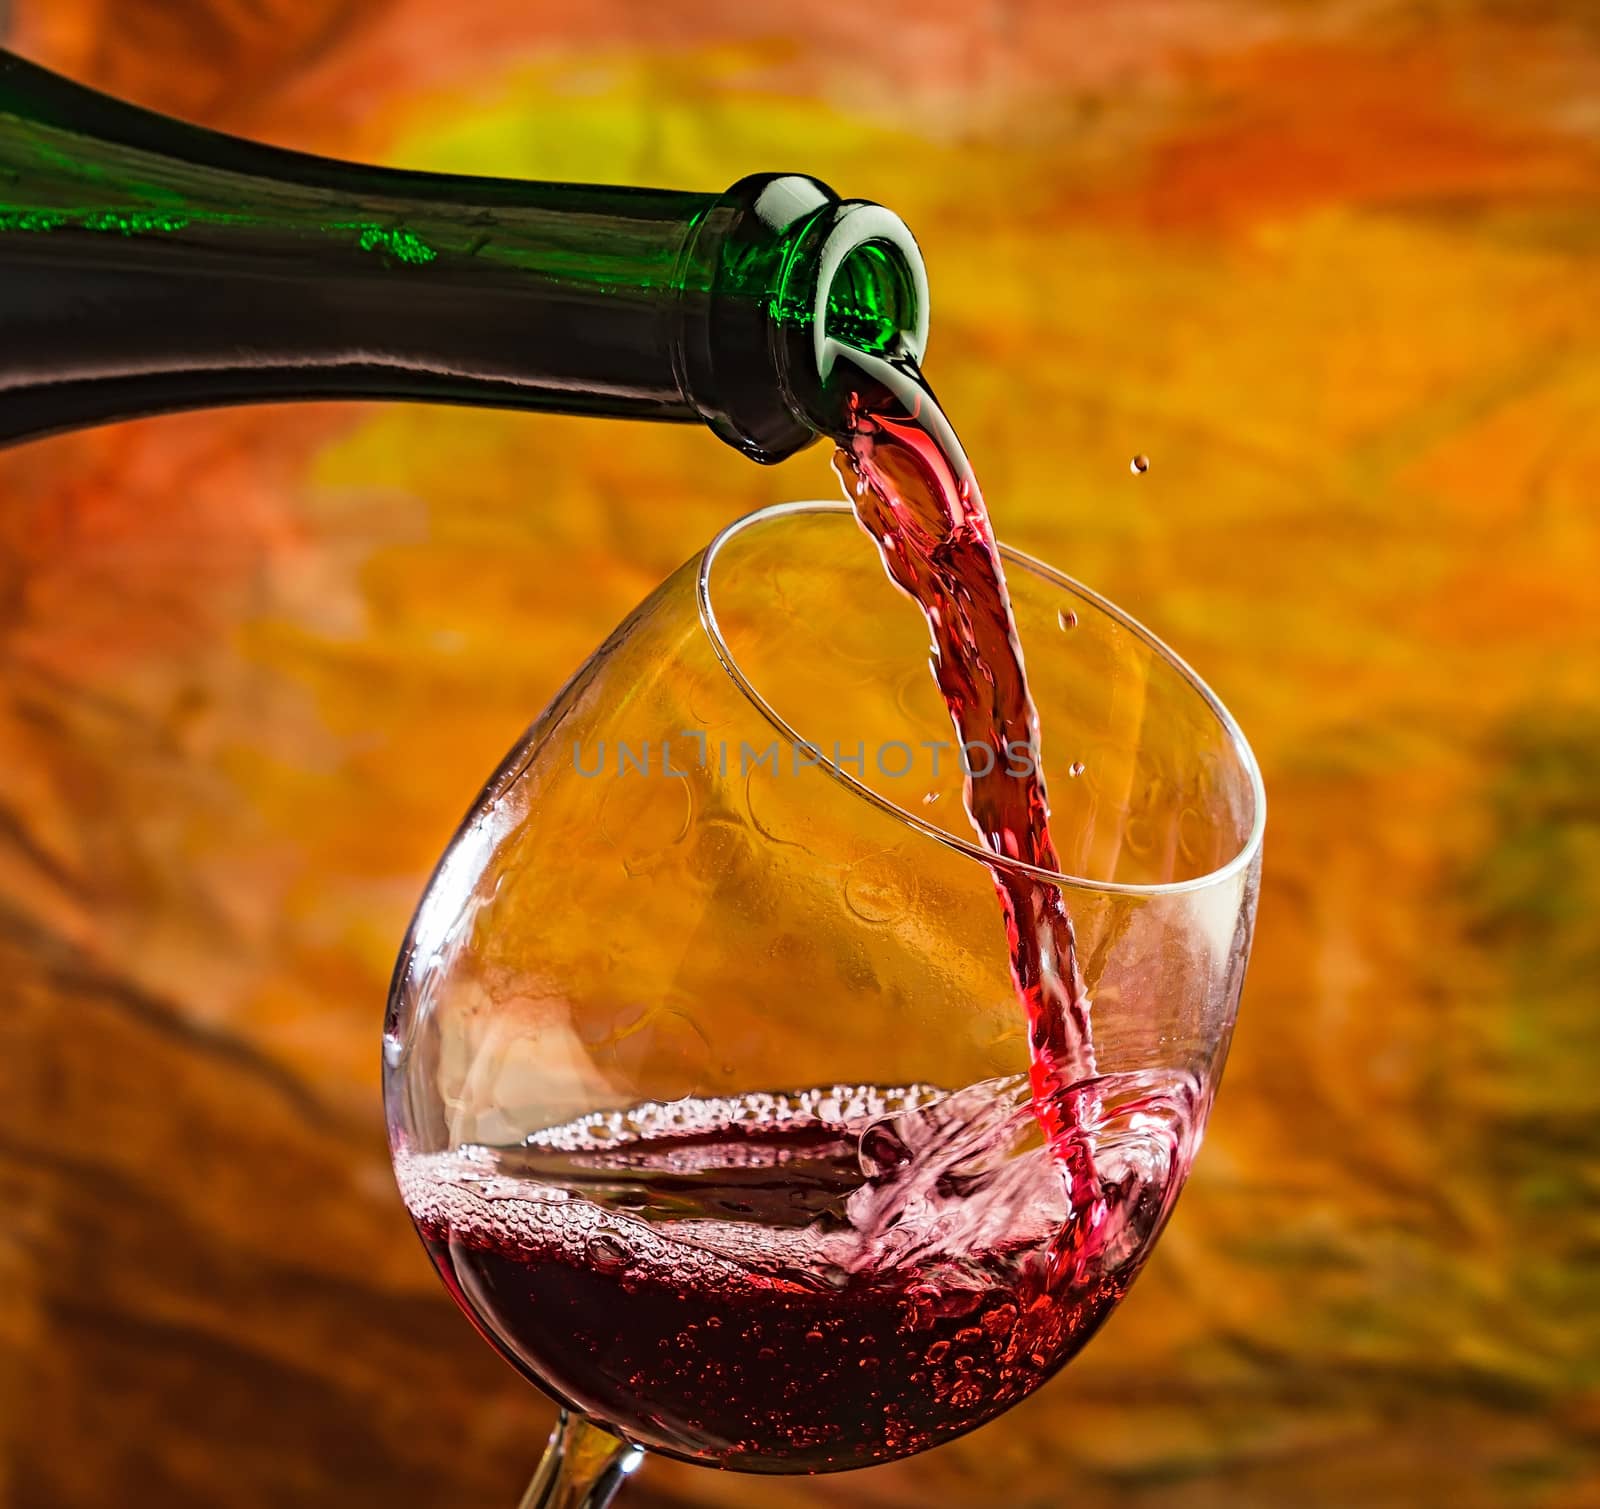 Wine pours into the glass of the bottle on a colored background